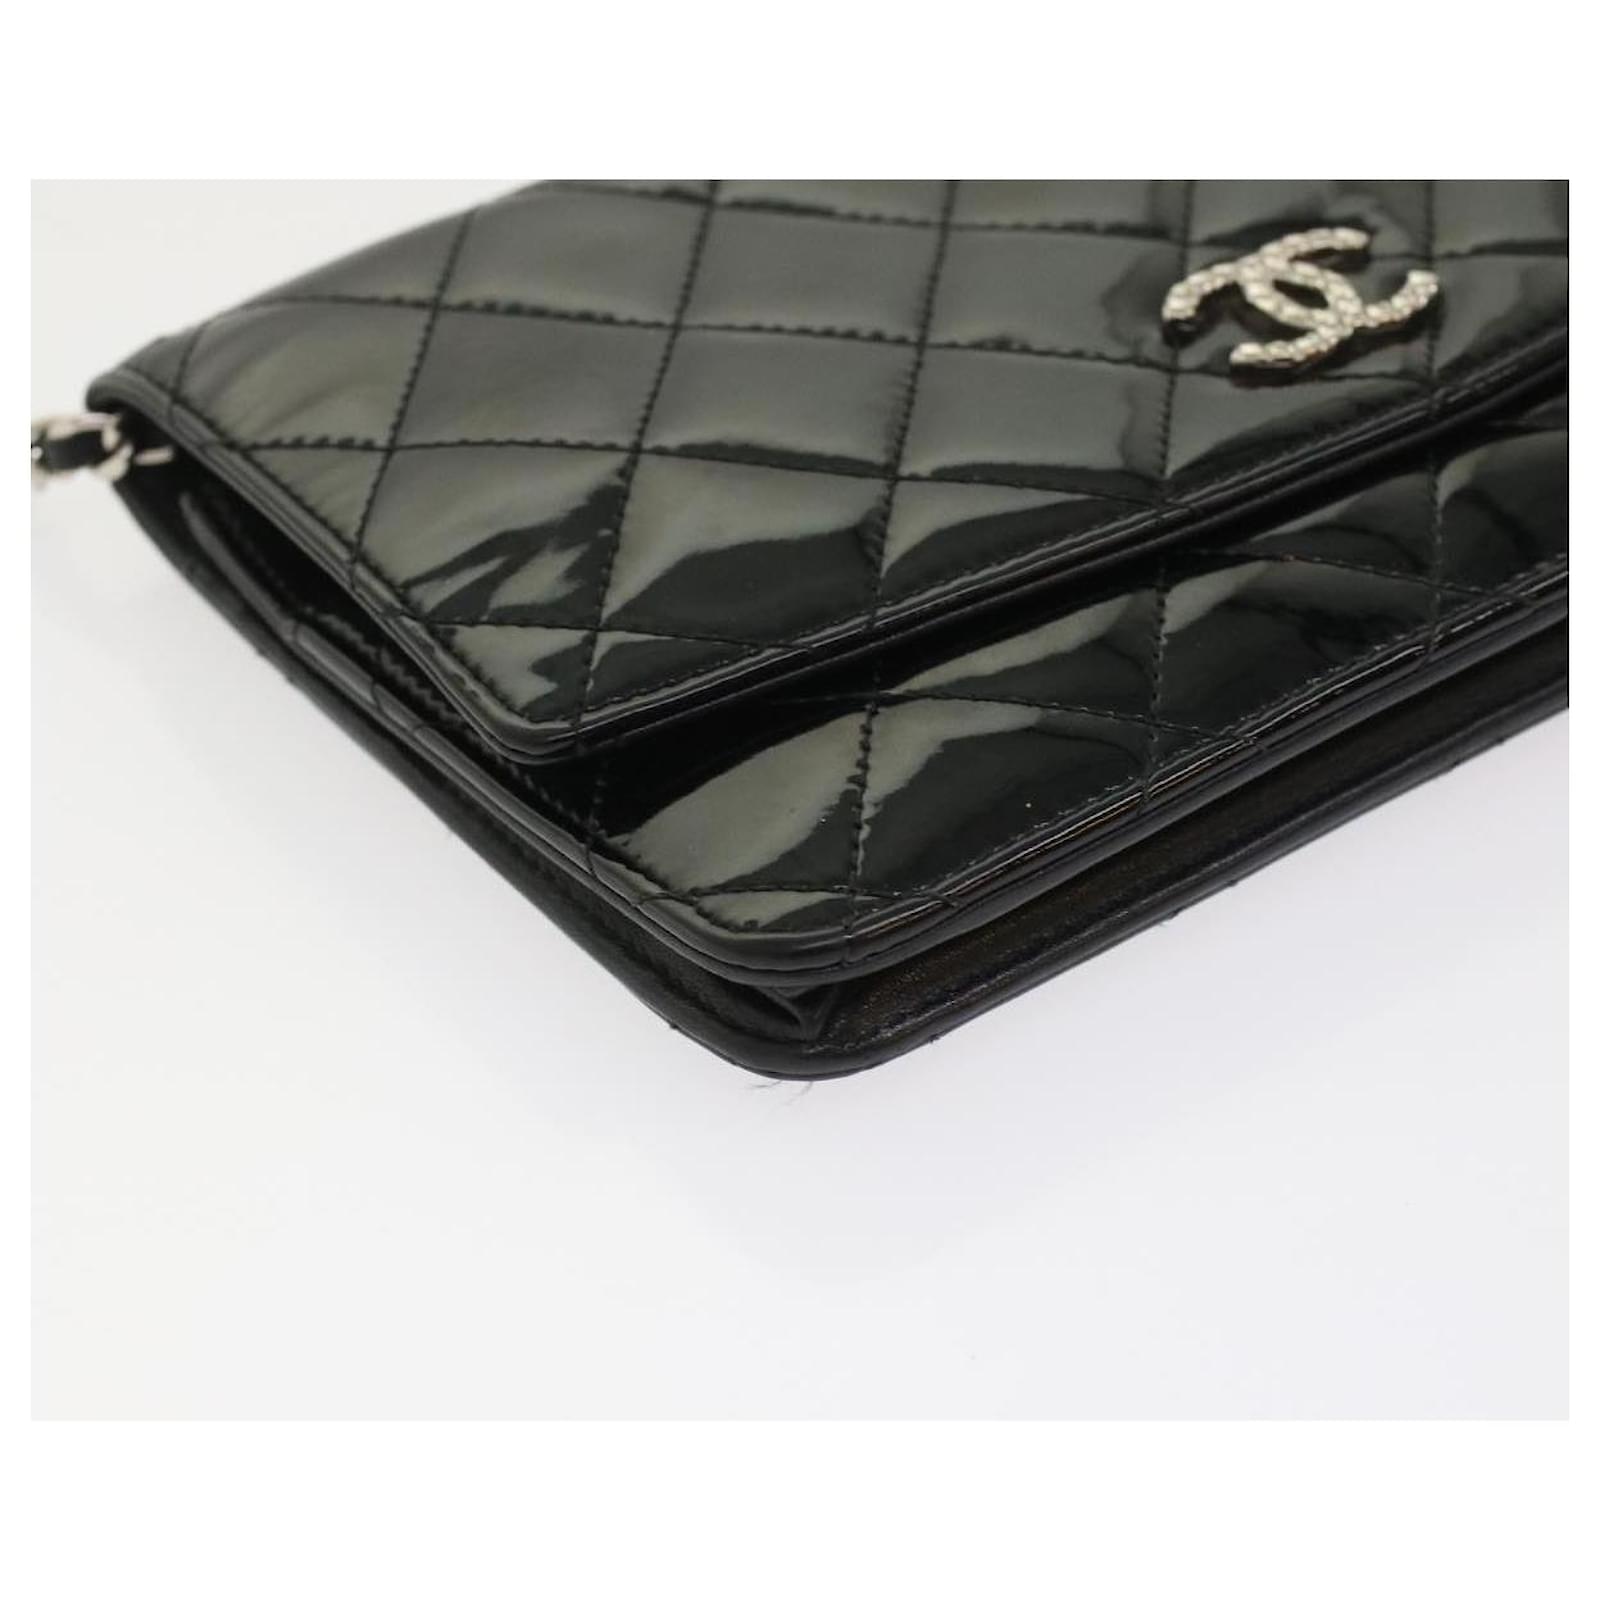 CHANEL Patent Quilted Brilliant Wallet On Chain WOC Dark Pink